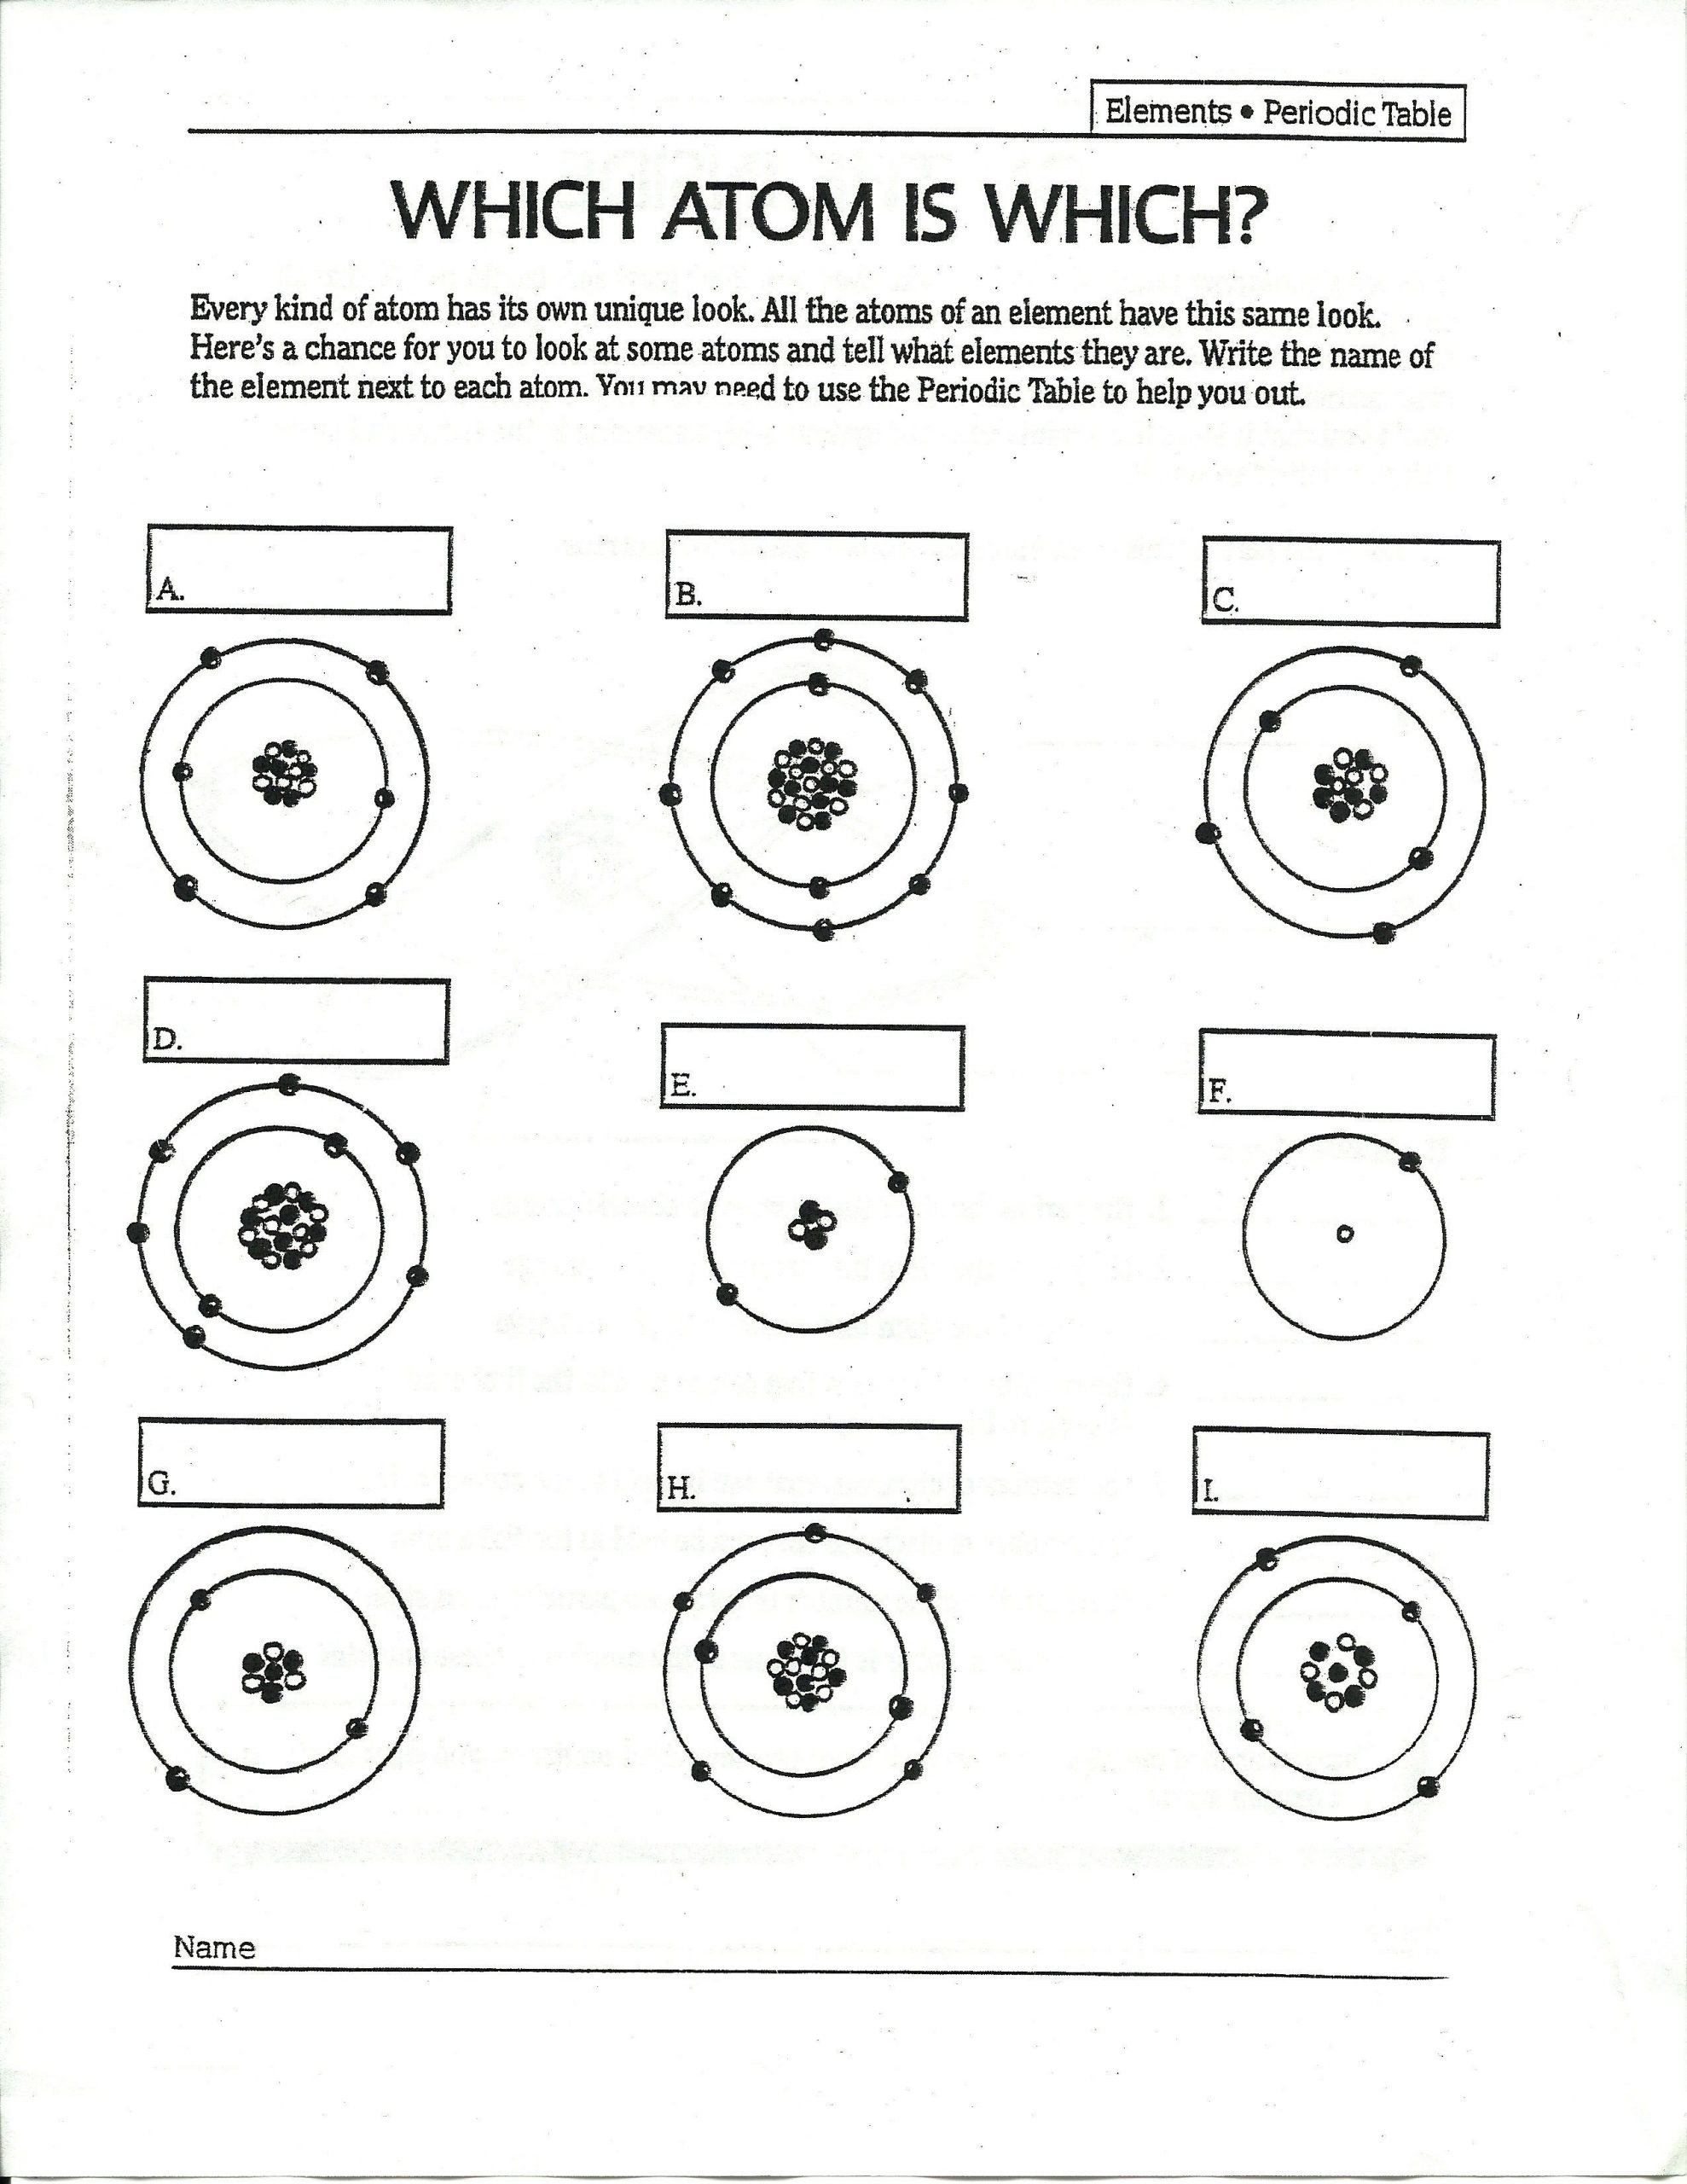 Atoms Worksheet Middle School Answers to Drawing atoms Worksheet Answers to Drawing